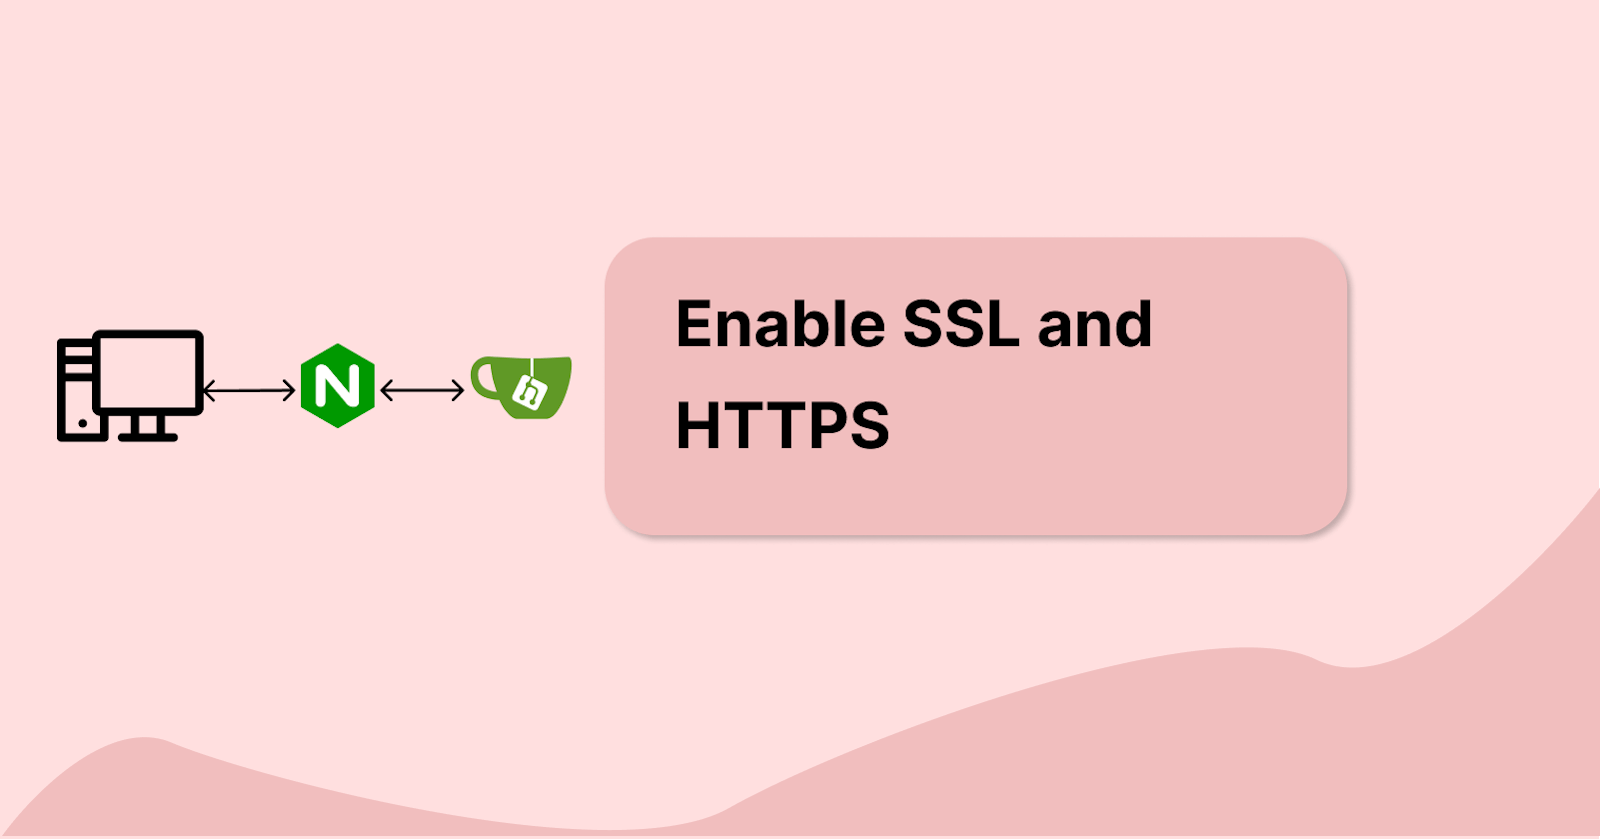 Enabling SSL and HTTPS in our application